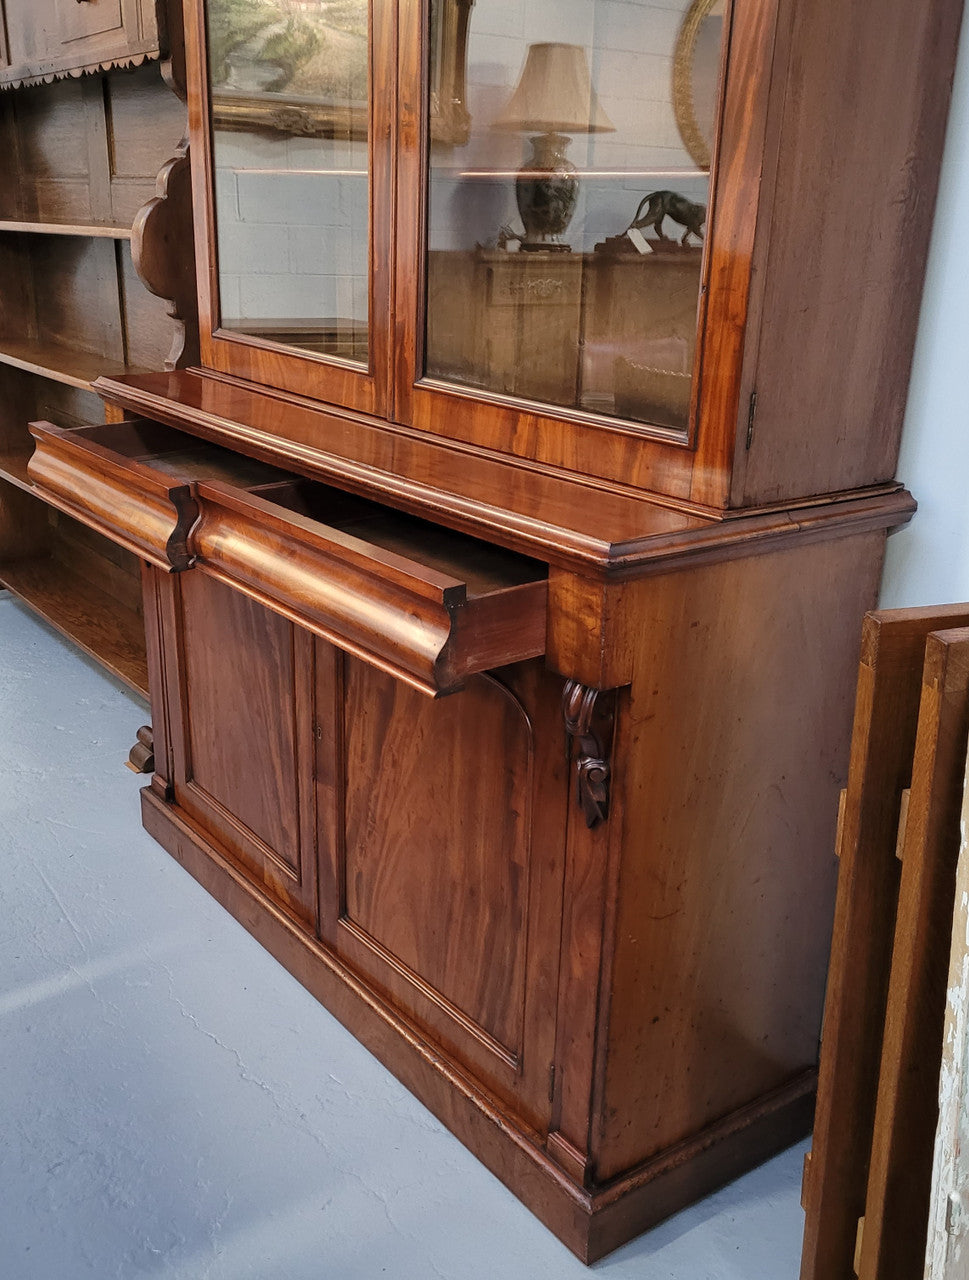 Early Victorian large flame Mahogany bookcase. Plenty of storage room with two doors and two drawers. In very good original detailed condition.